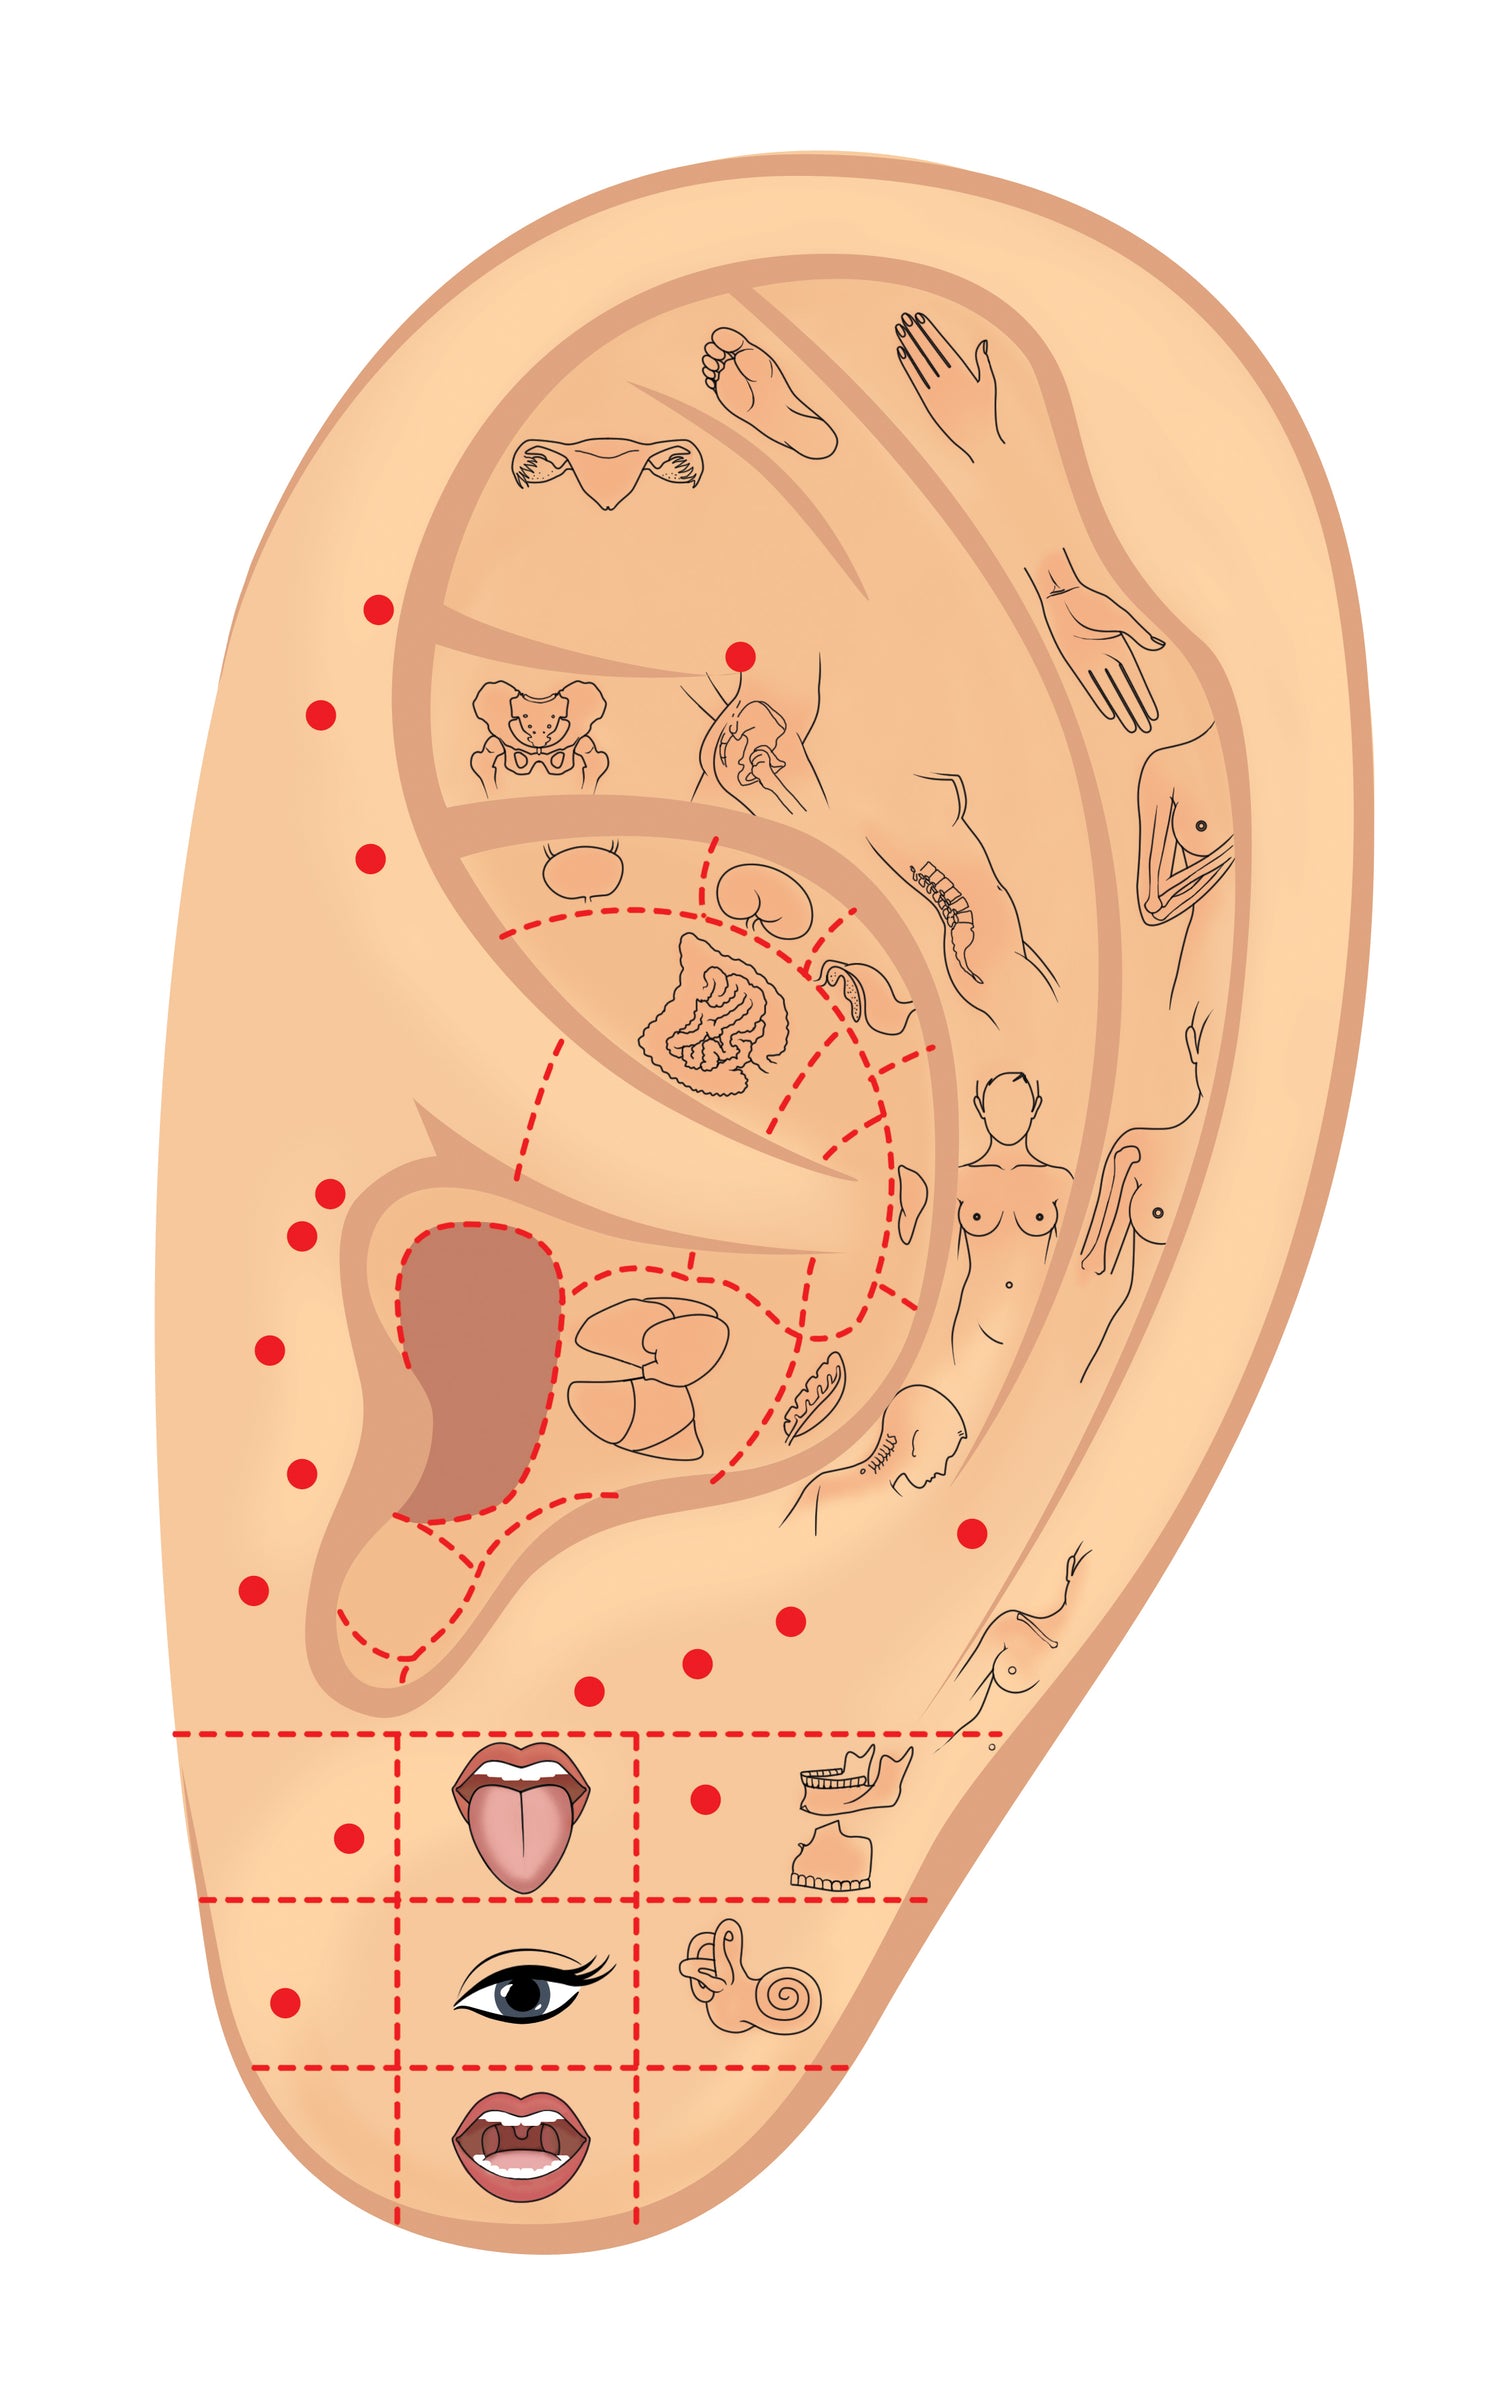 Ear Seeds Diagram for points